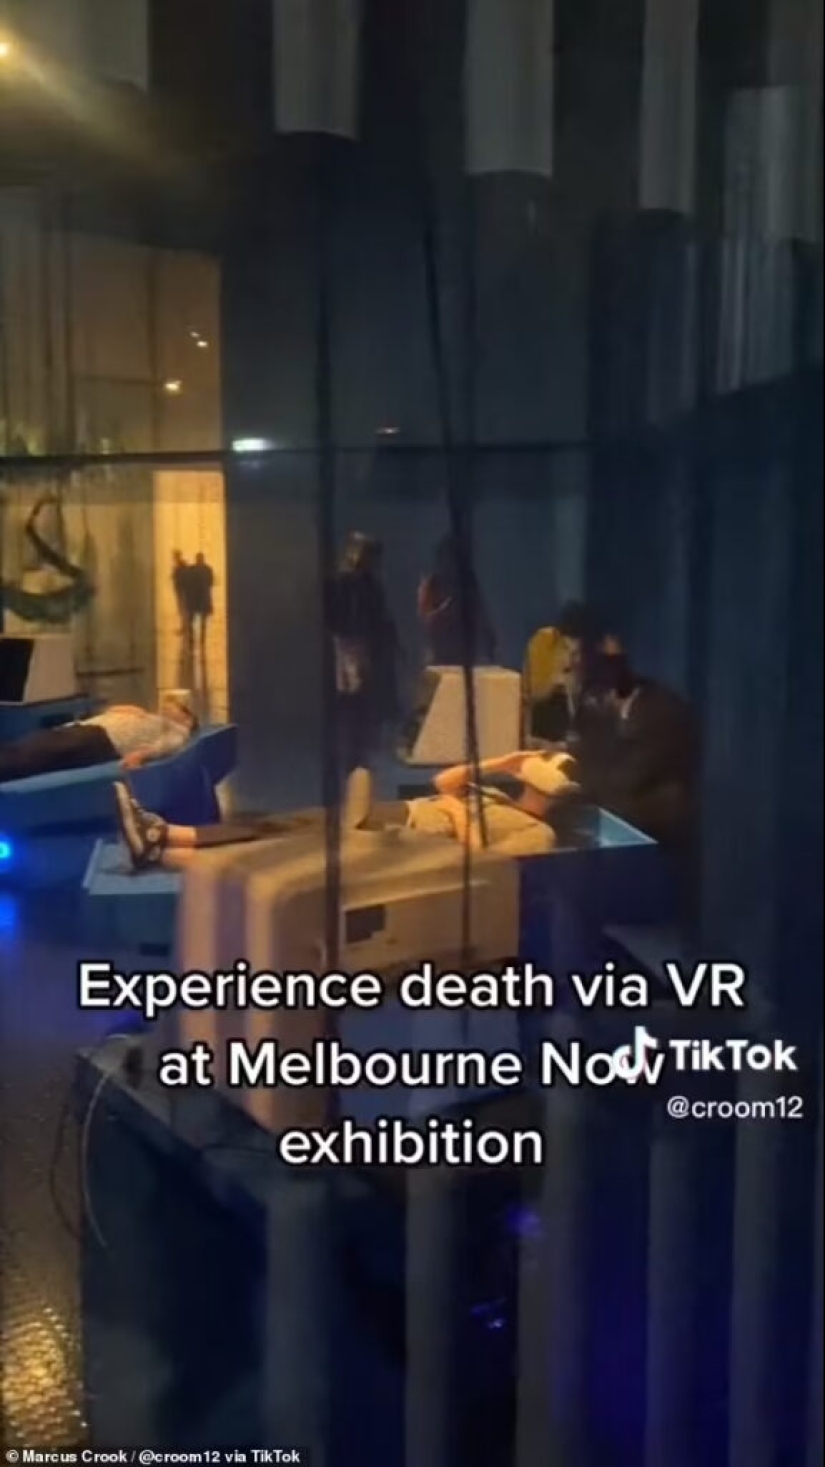 The artist created a &quot;death simulator&quot; immersing in the afterlife